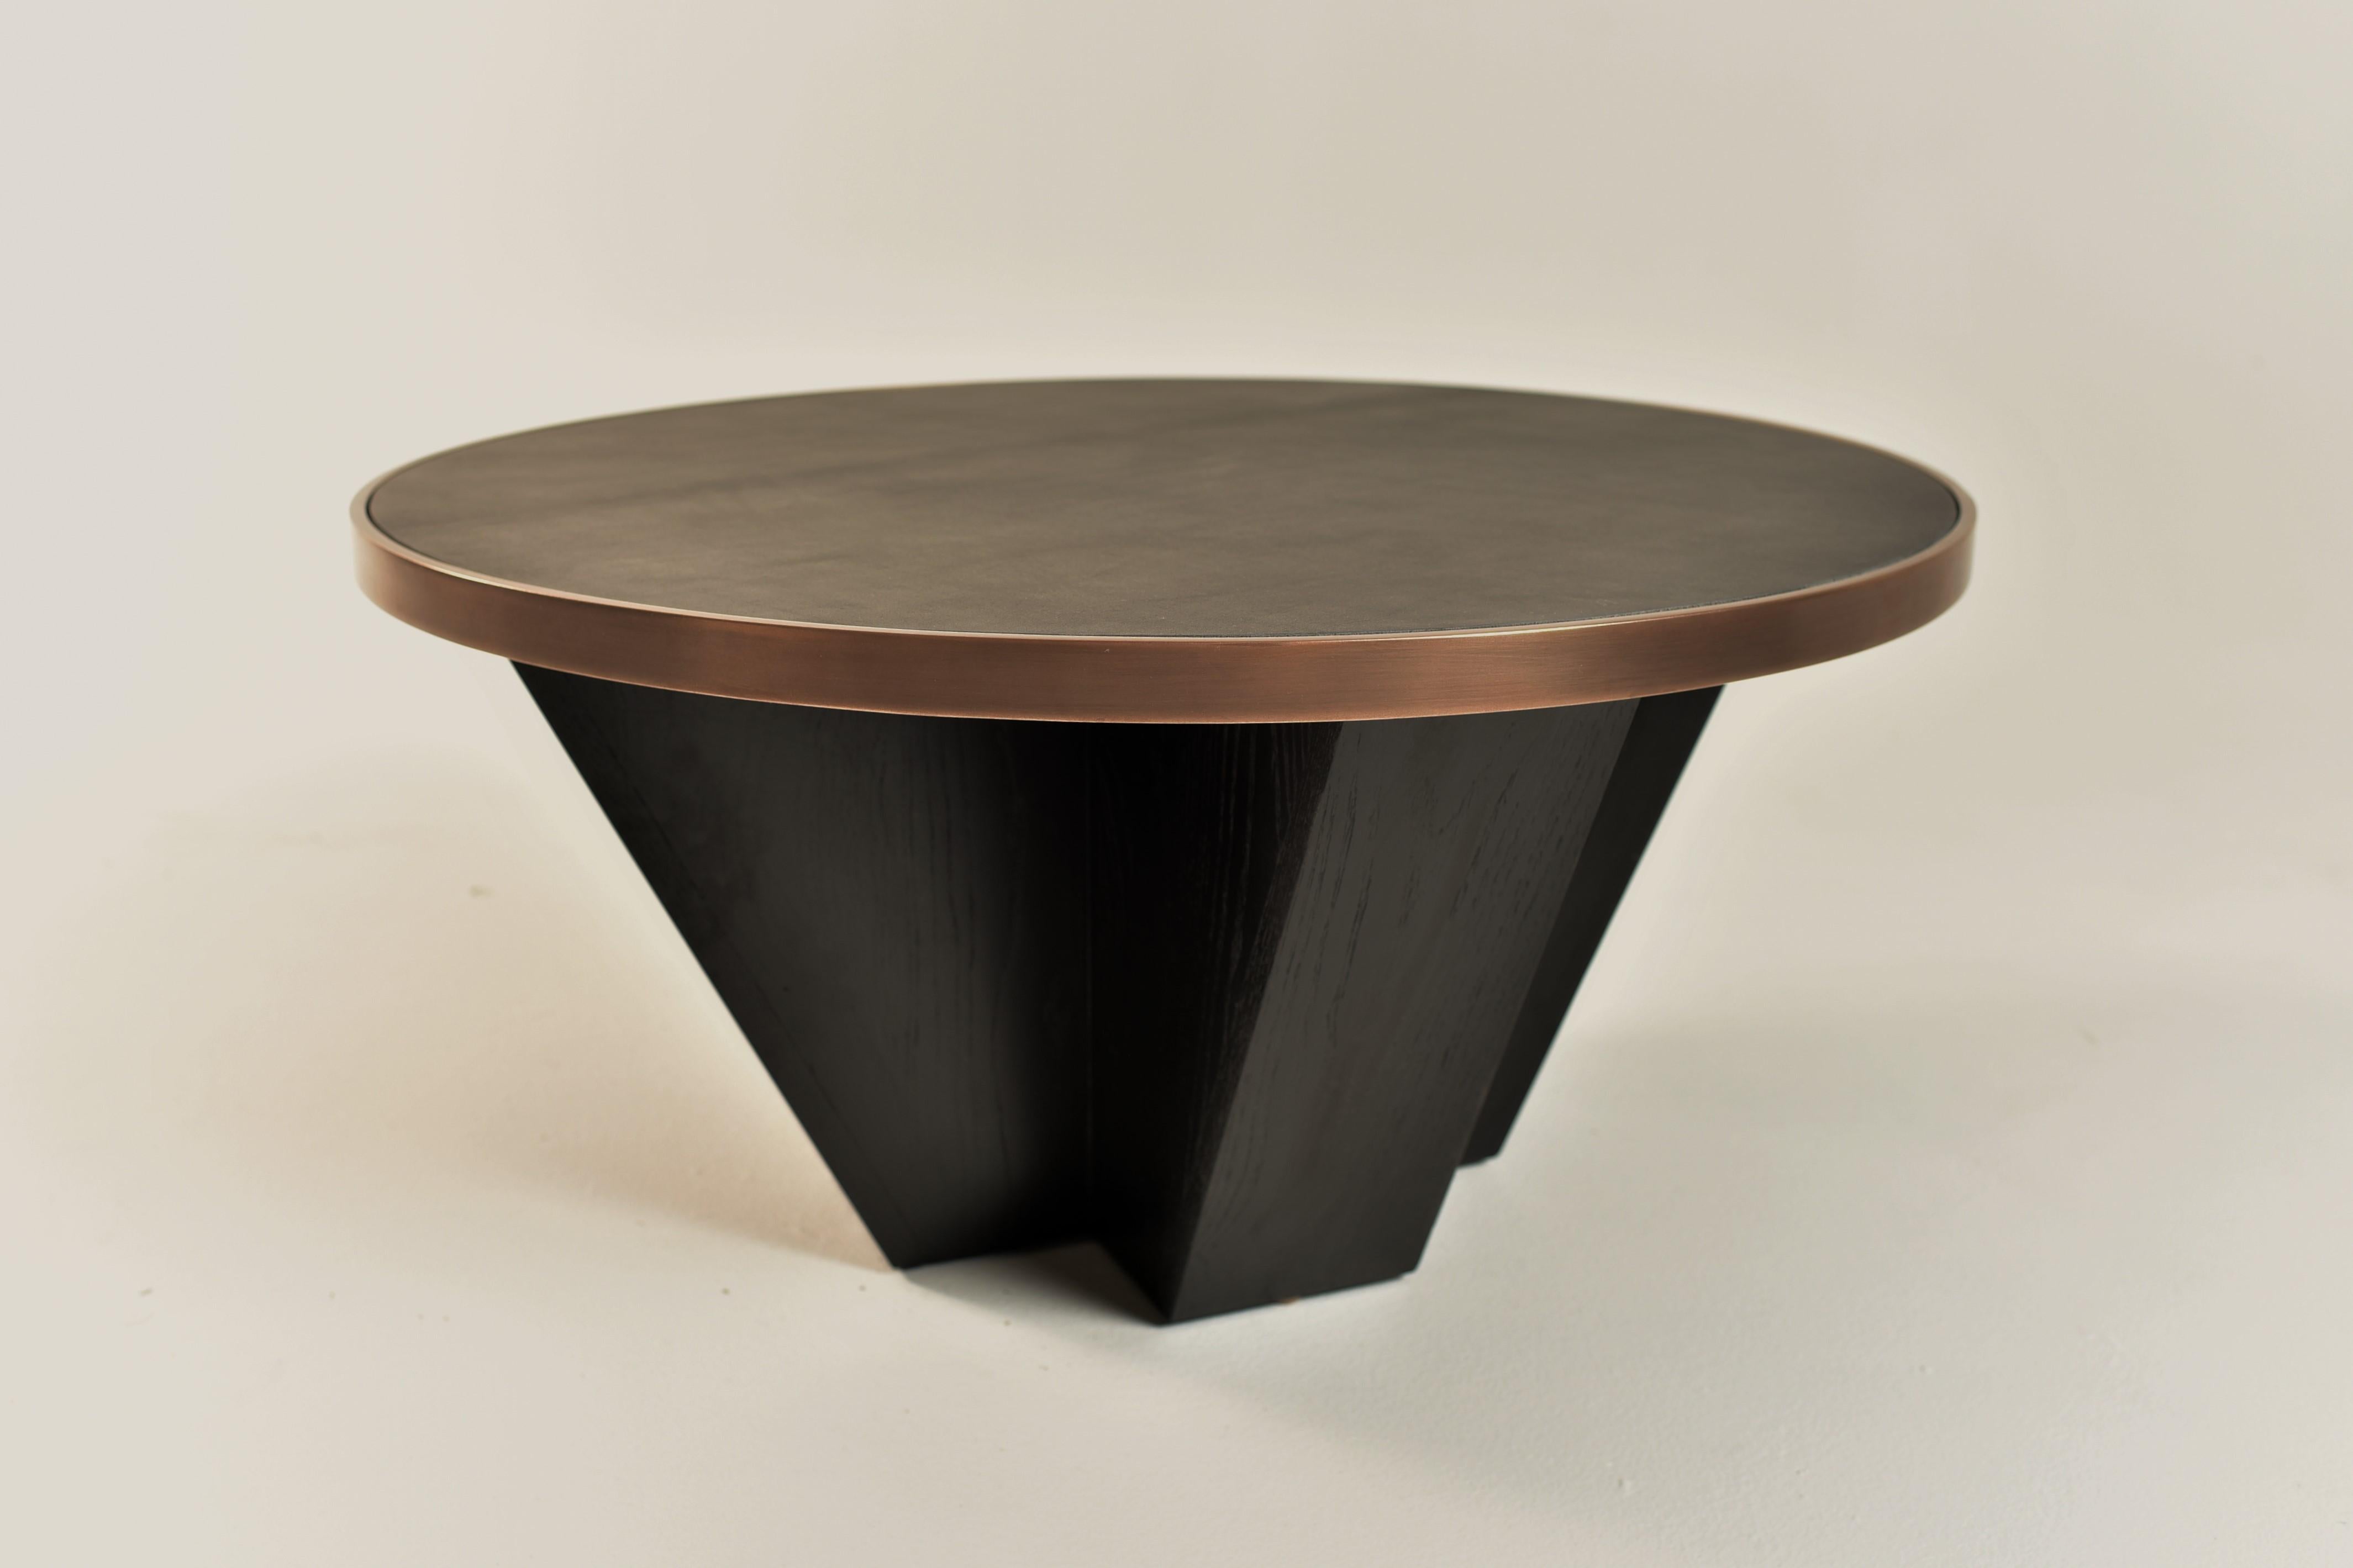 Ash and brass Venus coffee table by Jason Mizrahi
Dimensions: diameter 81.28 x height 38 cm
Materials: Stained ash, leather top, brass coated frame

Jason Mizrahi is a designer of contemporary furniture. He was born and raised in Los Angeles,